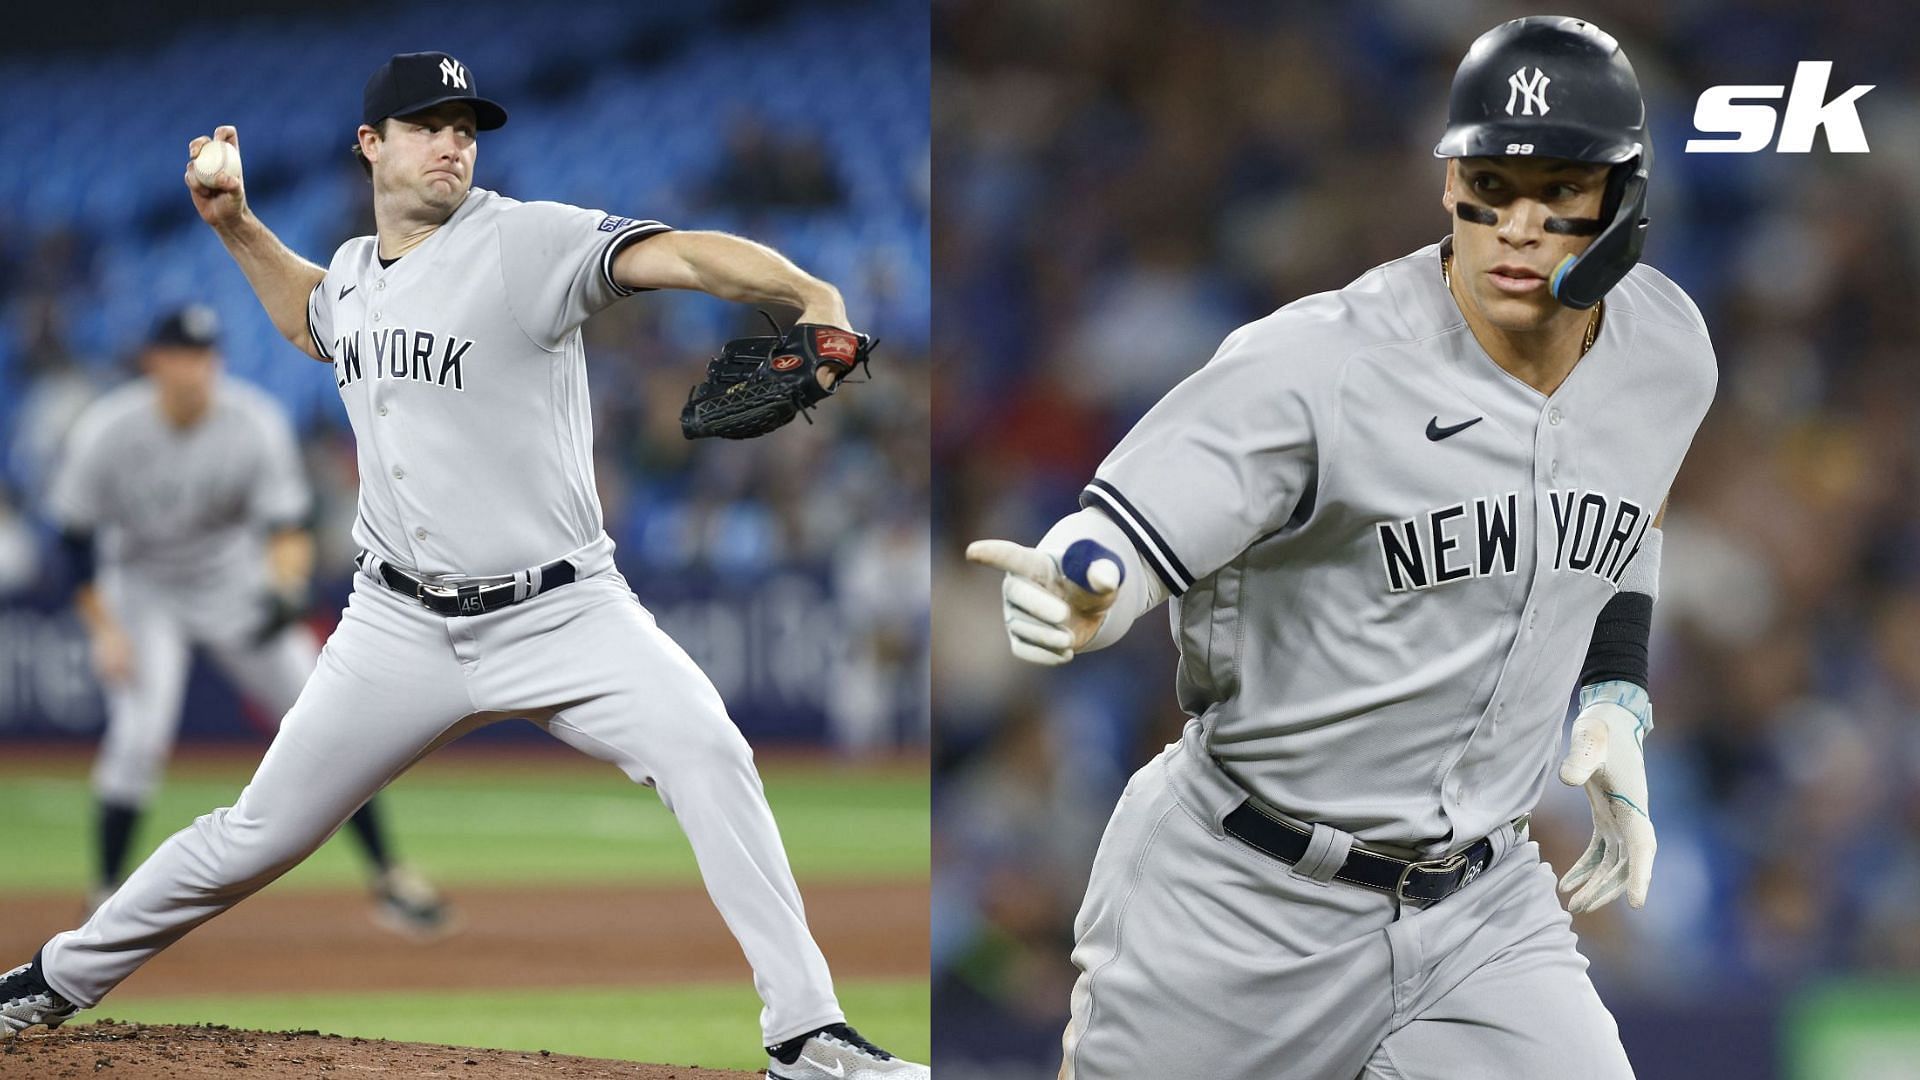 Google Bard predicts that the New York Yankees will bounce back in 2024